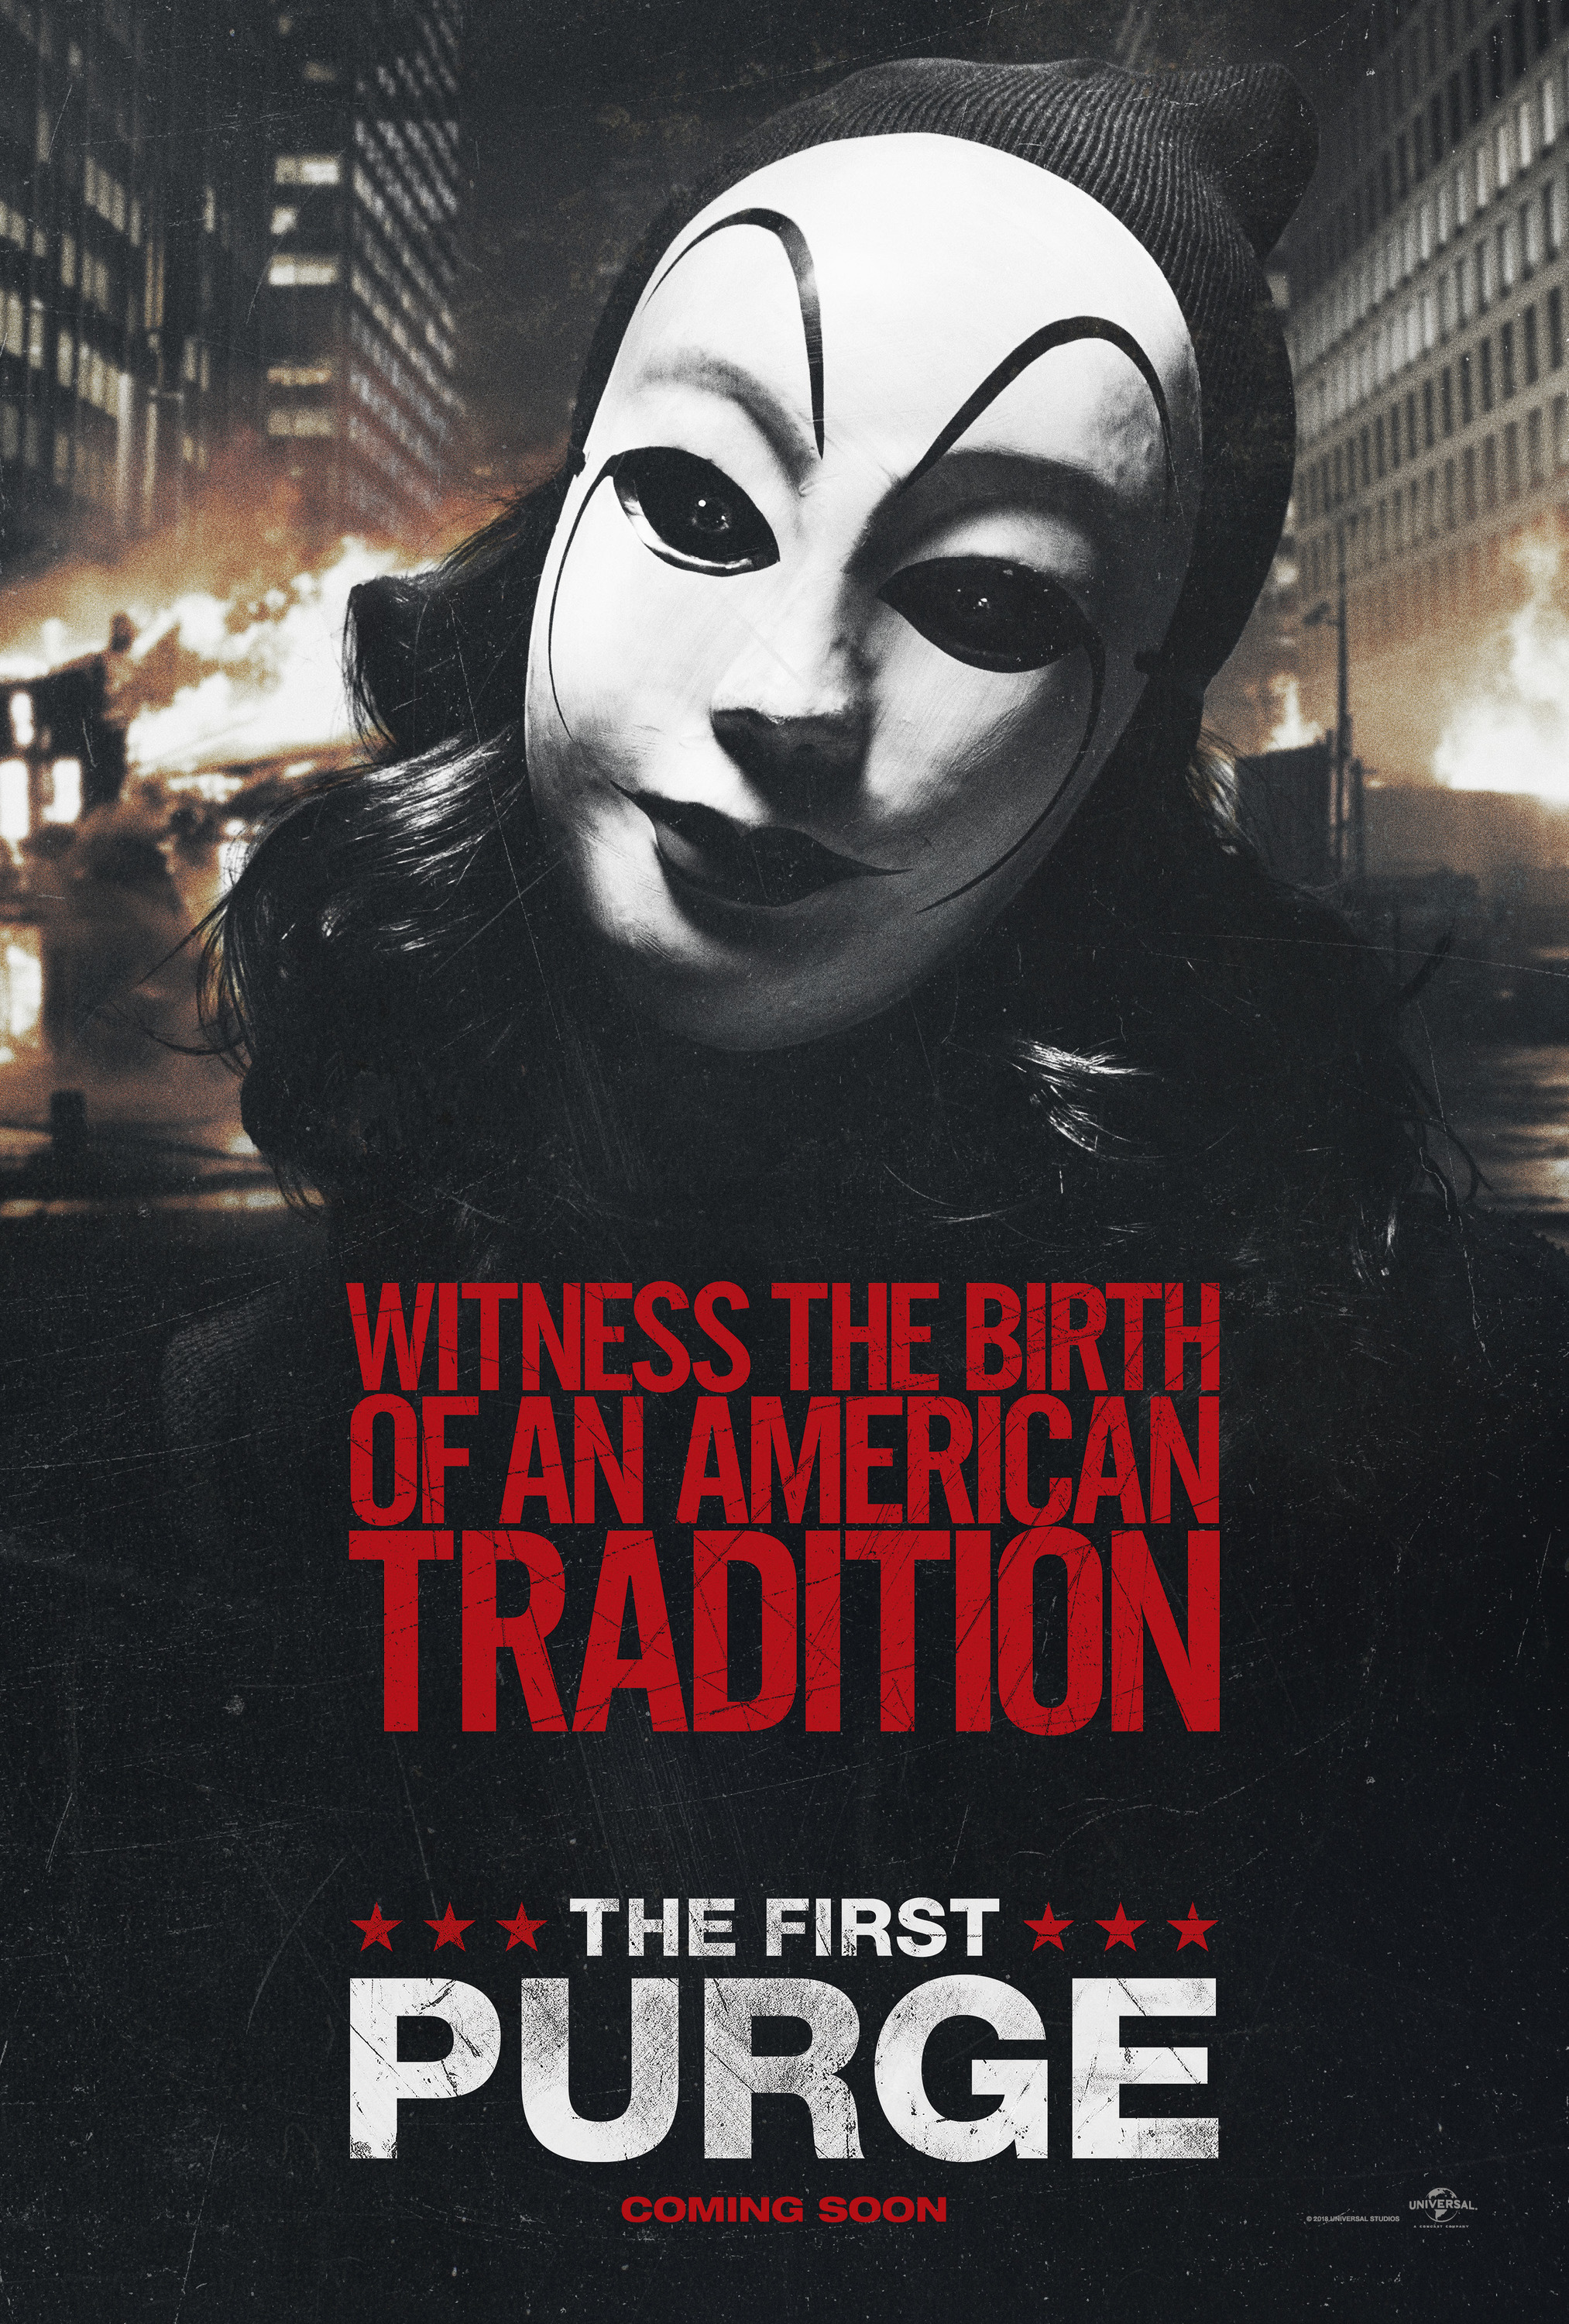 Mega Sized Movie Poster Image for The First Purge (#5 of 12)